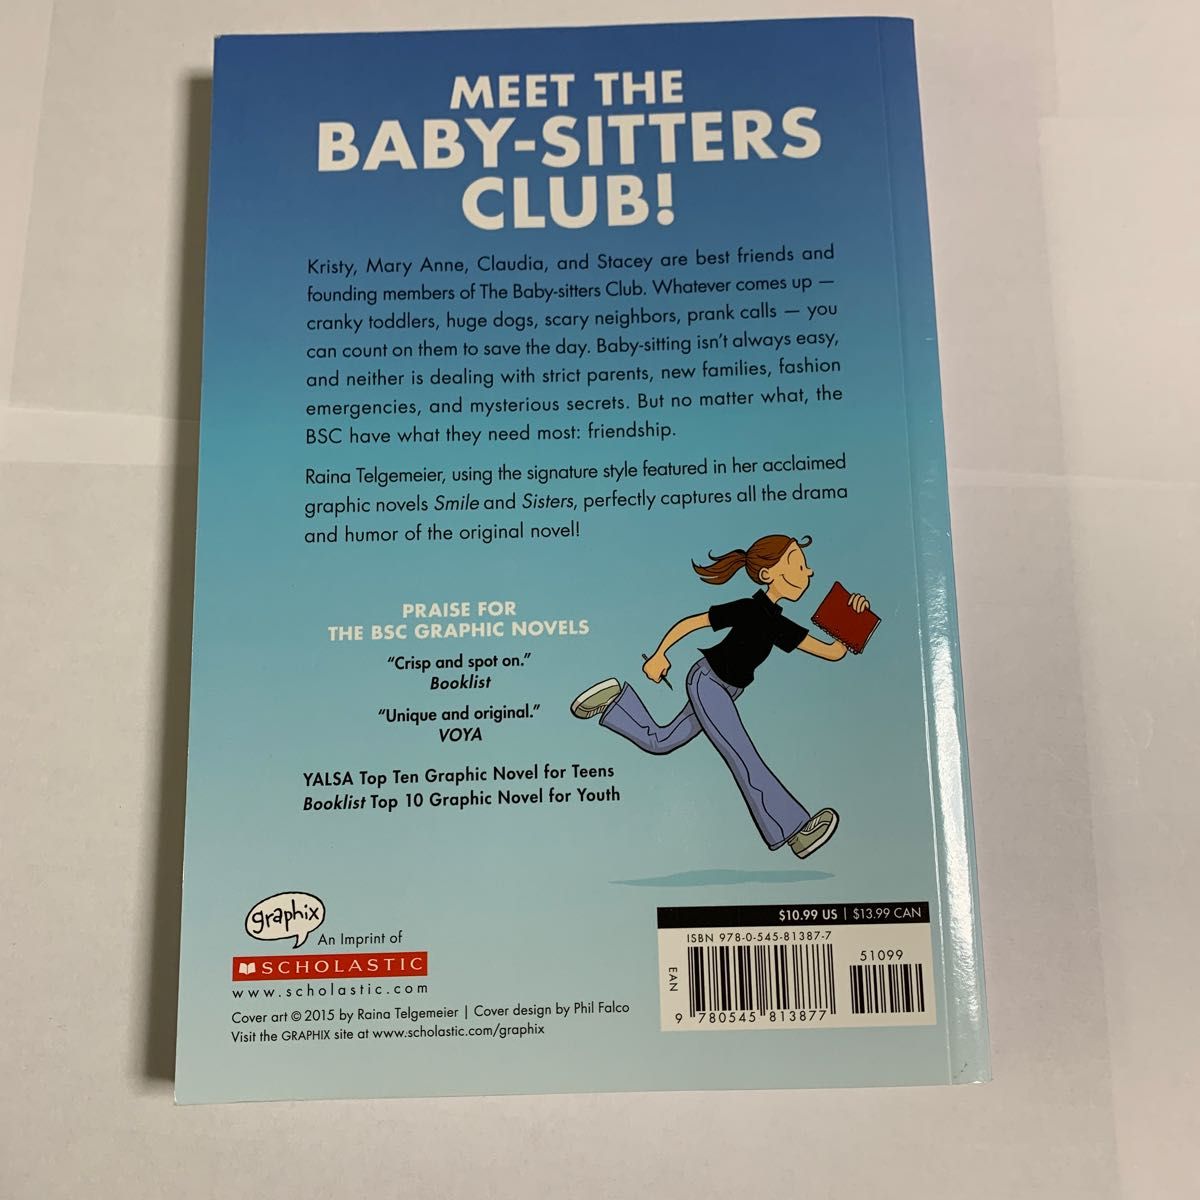 the baby-sitters club